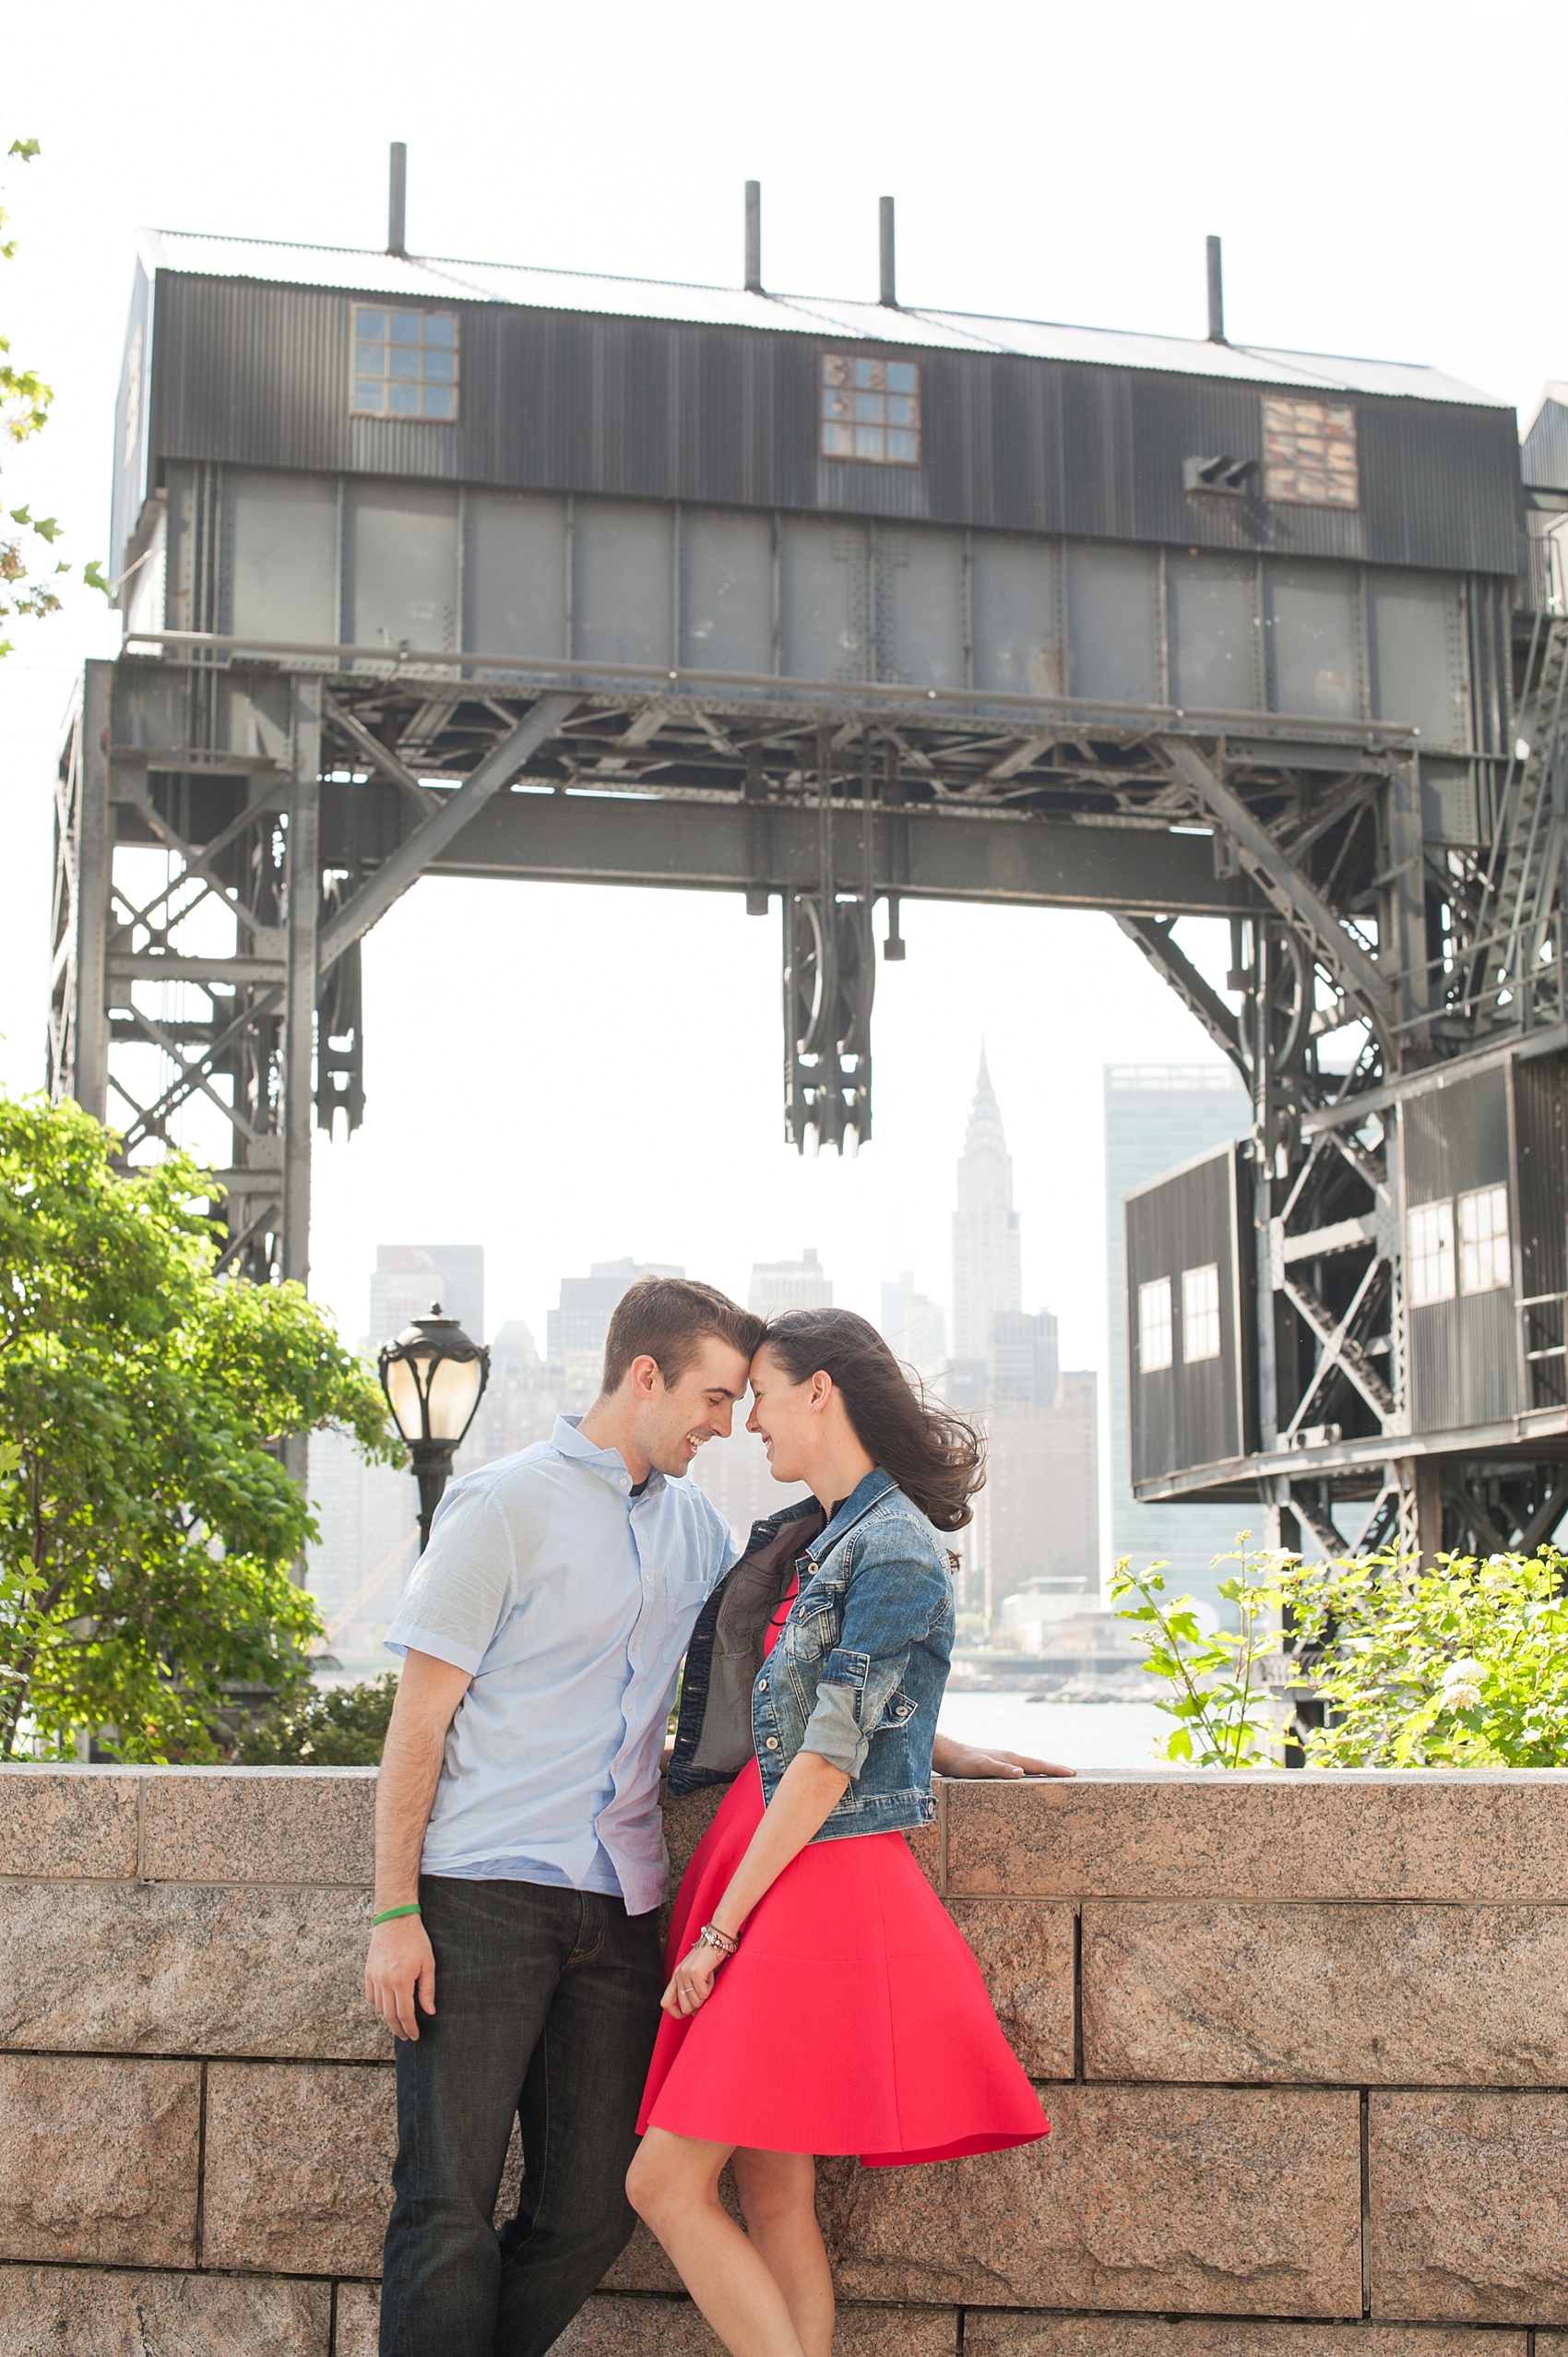 Long Island City waterfront engagement session at Gantry State Park by Mikkel Paige Photography. Complete with the Empire State Building in the background!